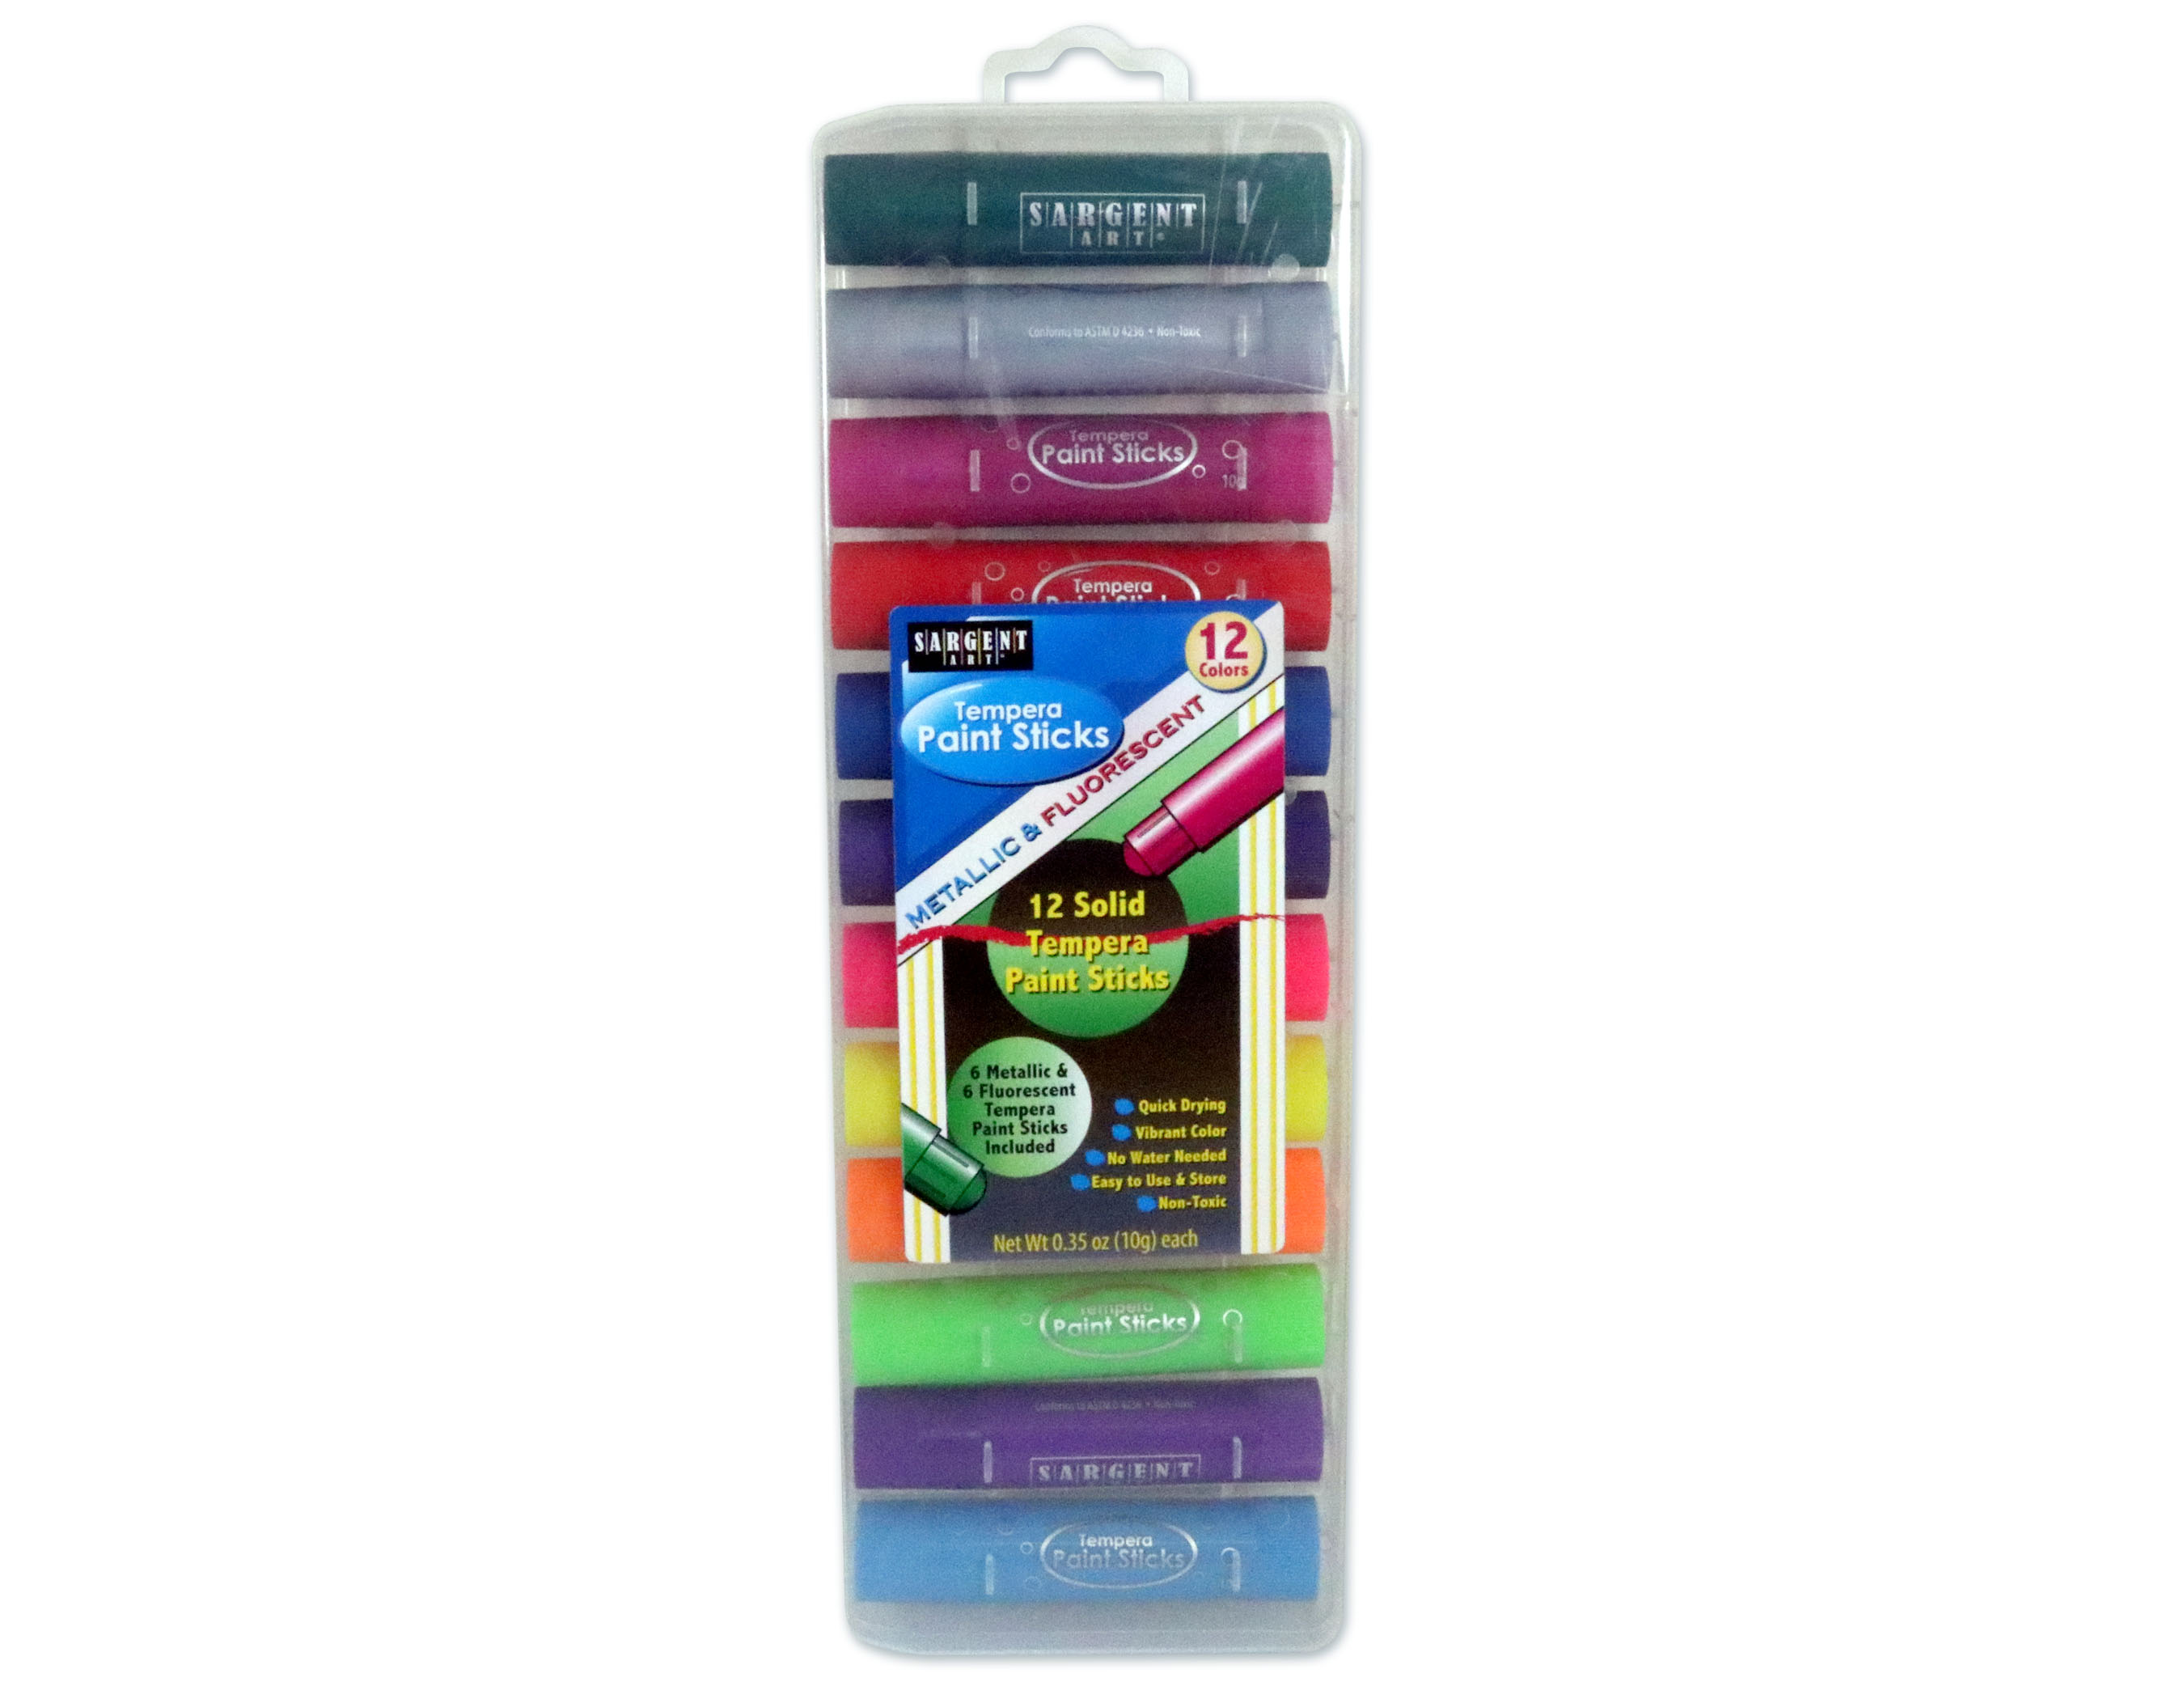  Creativity Street Glide-On Tempera Paint Sticks, 6 Assorted  Fluorescent Colors, 5 Grams, 6 Count : Toys & Games